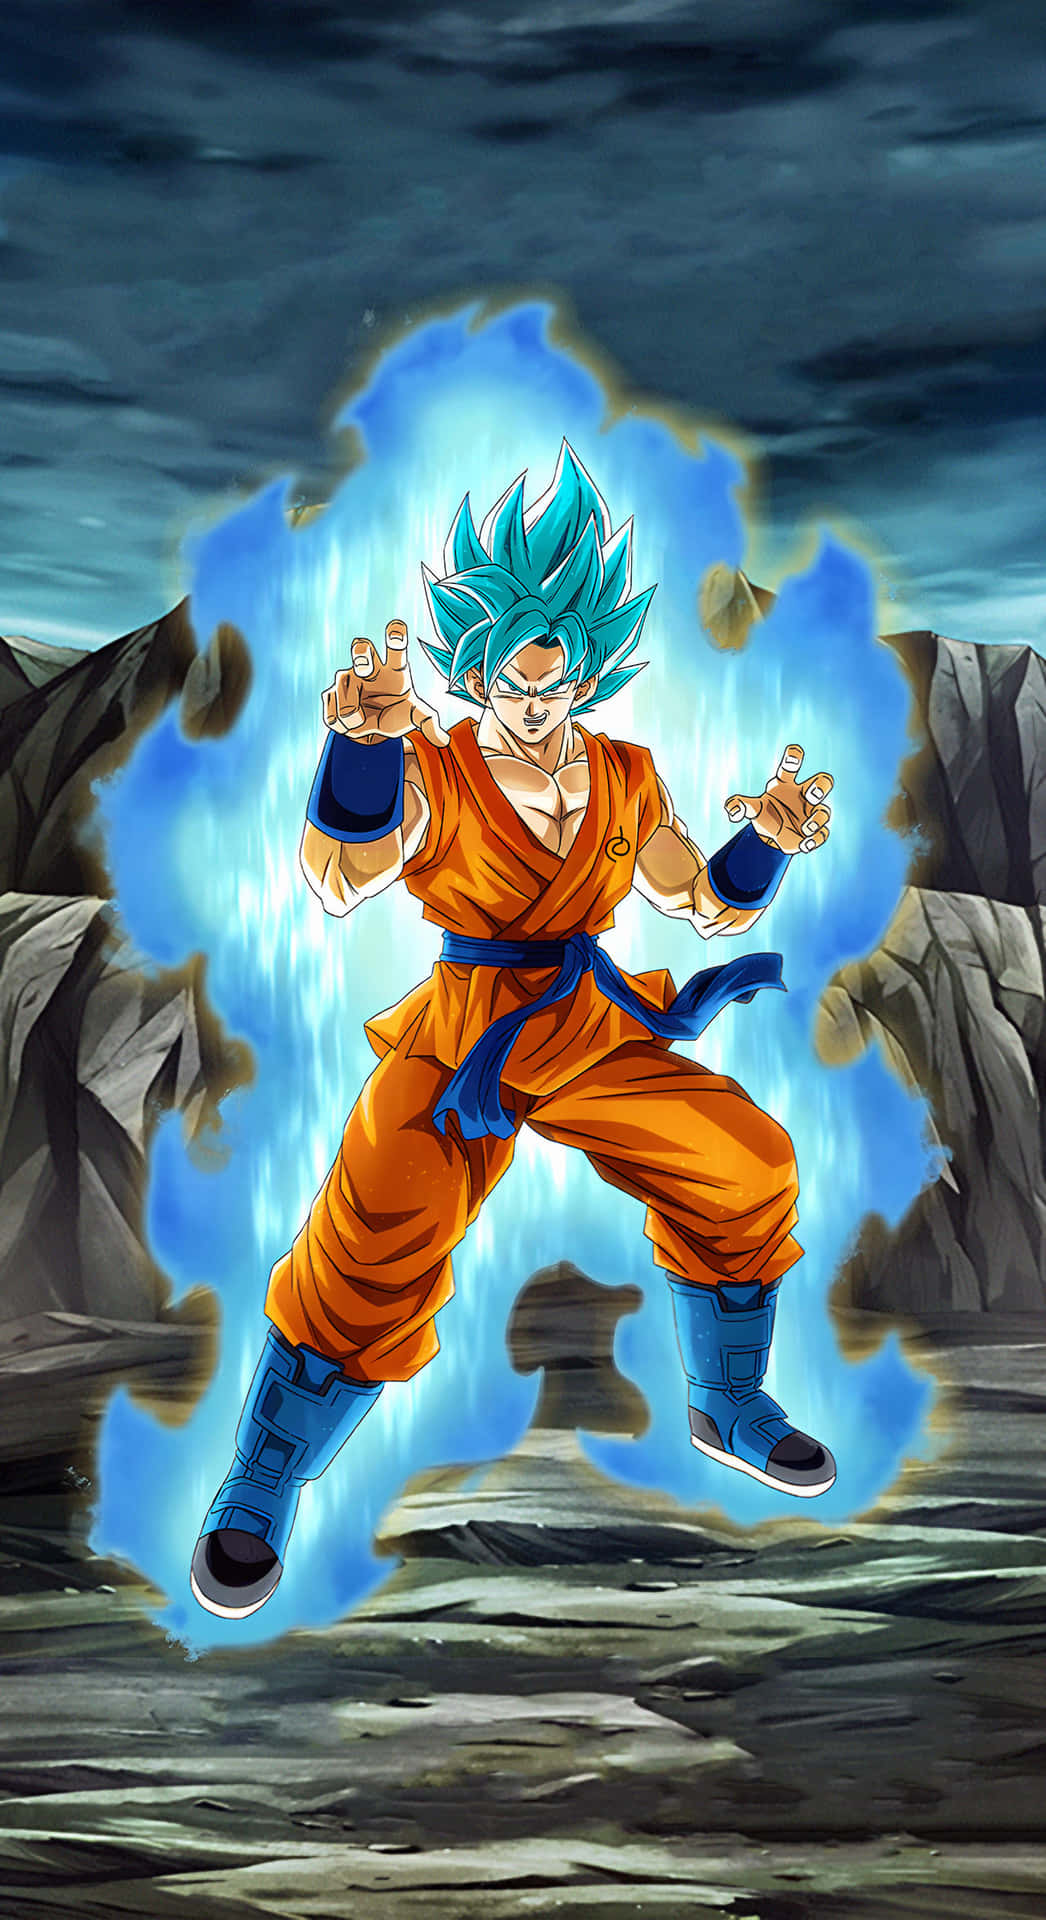 Take your power to the next level with Super Saiyan God Wallpaper